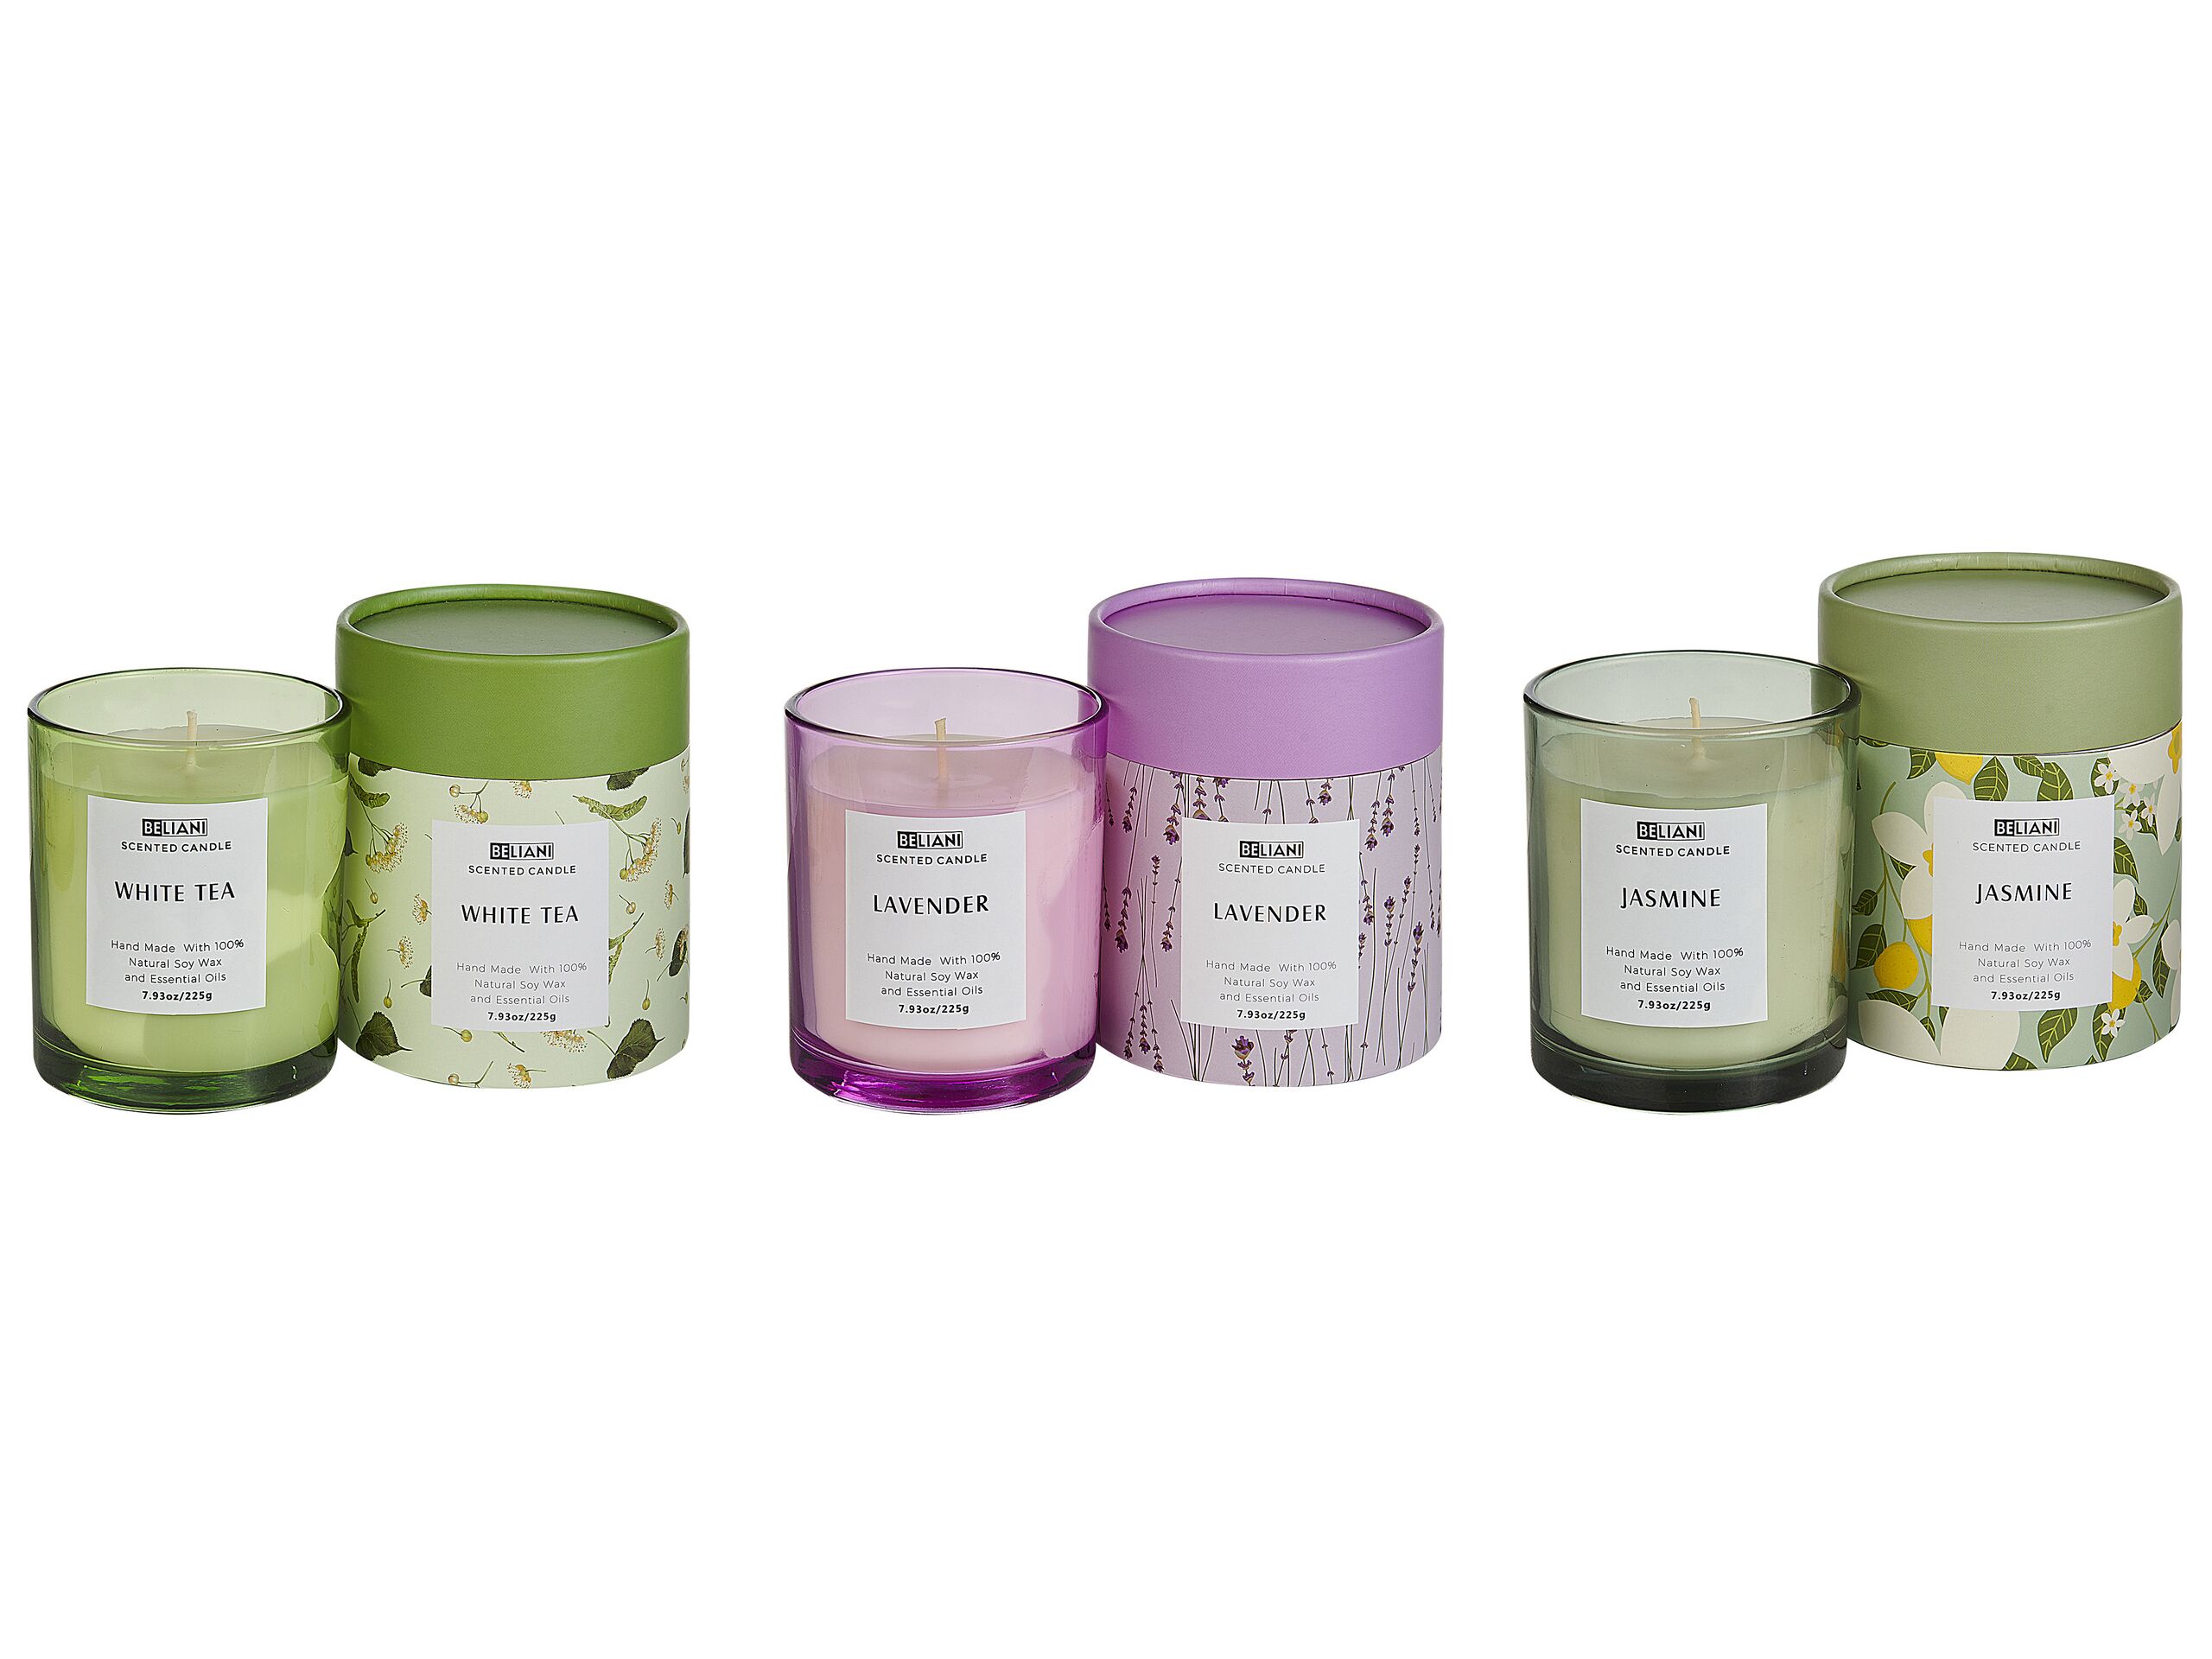 Set Of 3 Scented Candles Multicolour 100% Soy Wax Cotton Wick Glass Floral Oriental Herb Fragrance White Tea/lavender/jasmine Beliani